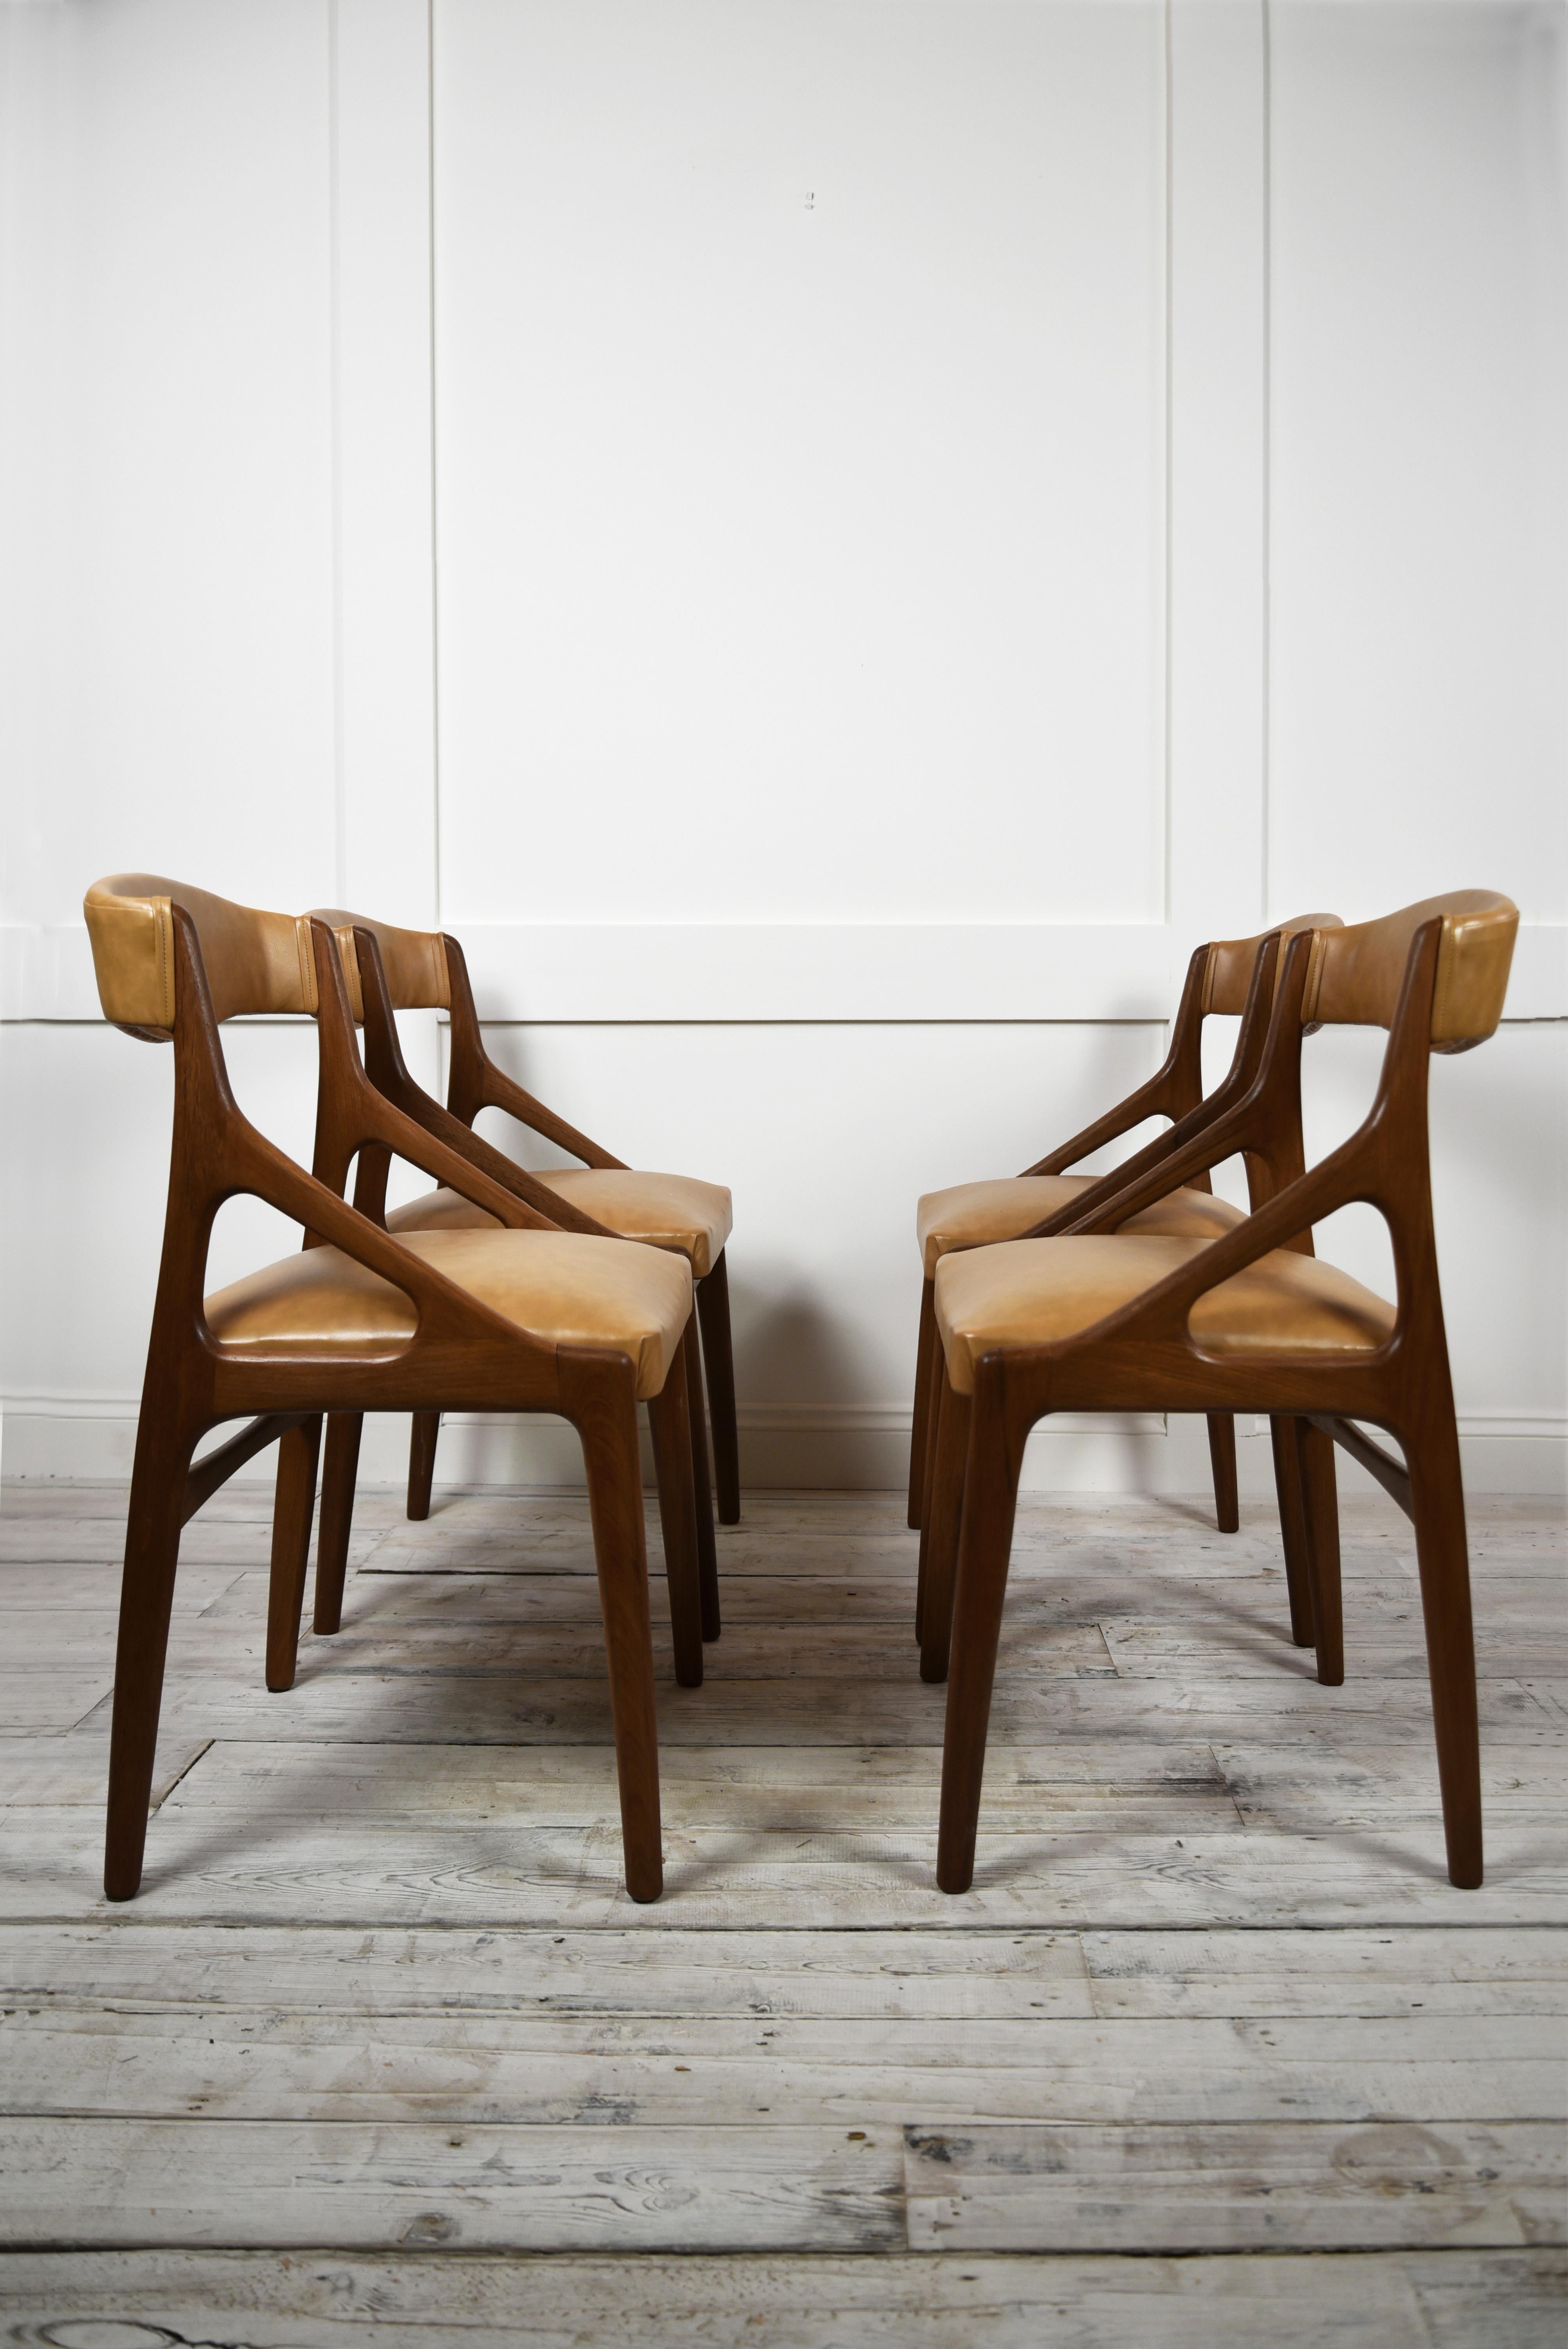 Set of Four Midcentury Modern Teak and Leatherette Dining Chairs c.1960's In Good Condition For Sale In London, GB